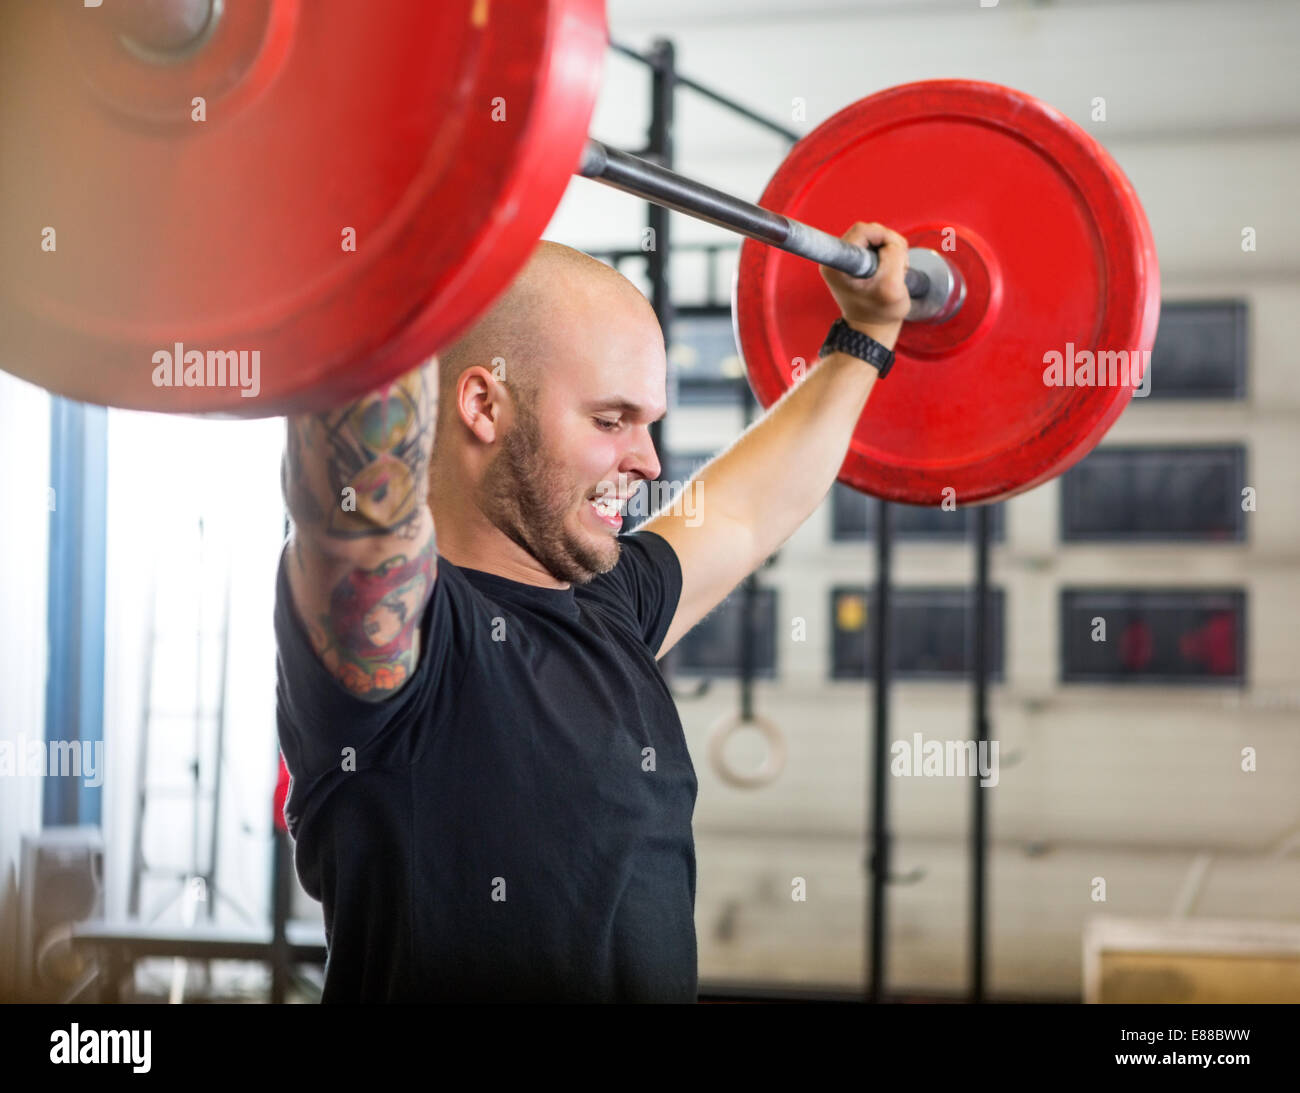 Athlete Exercising With Barbell At Gym Stock Photo